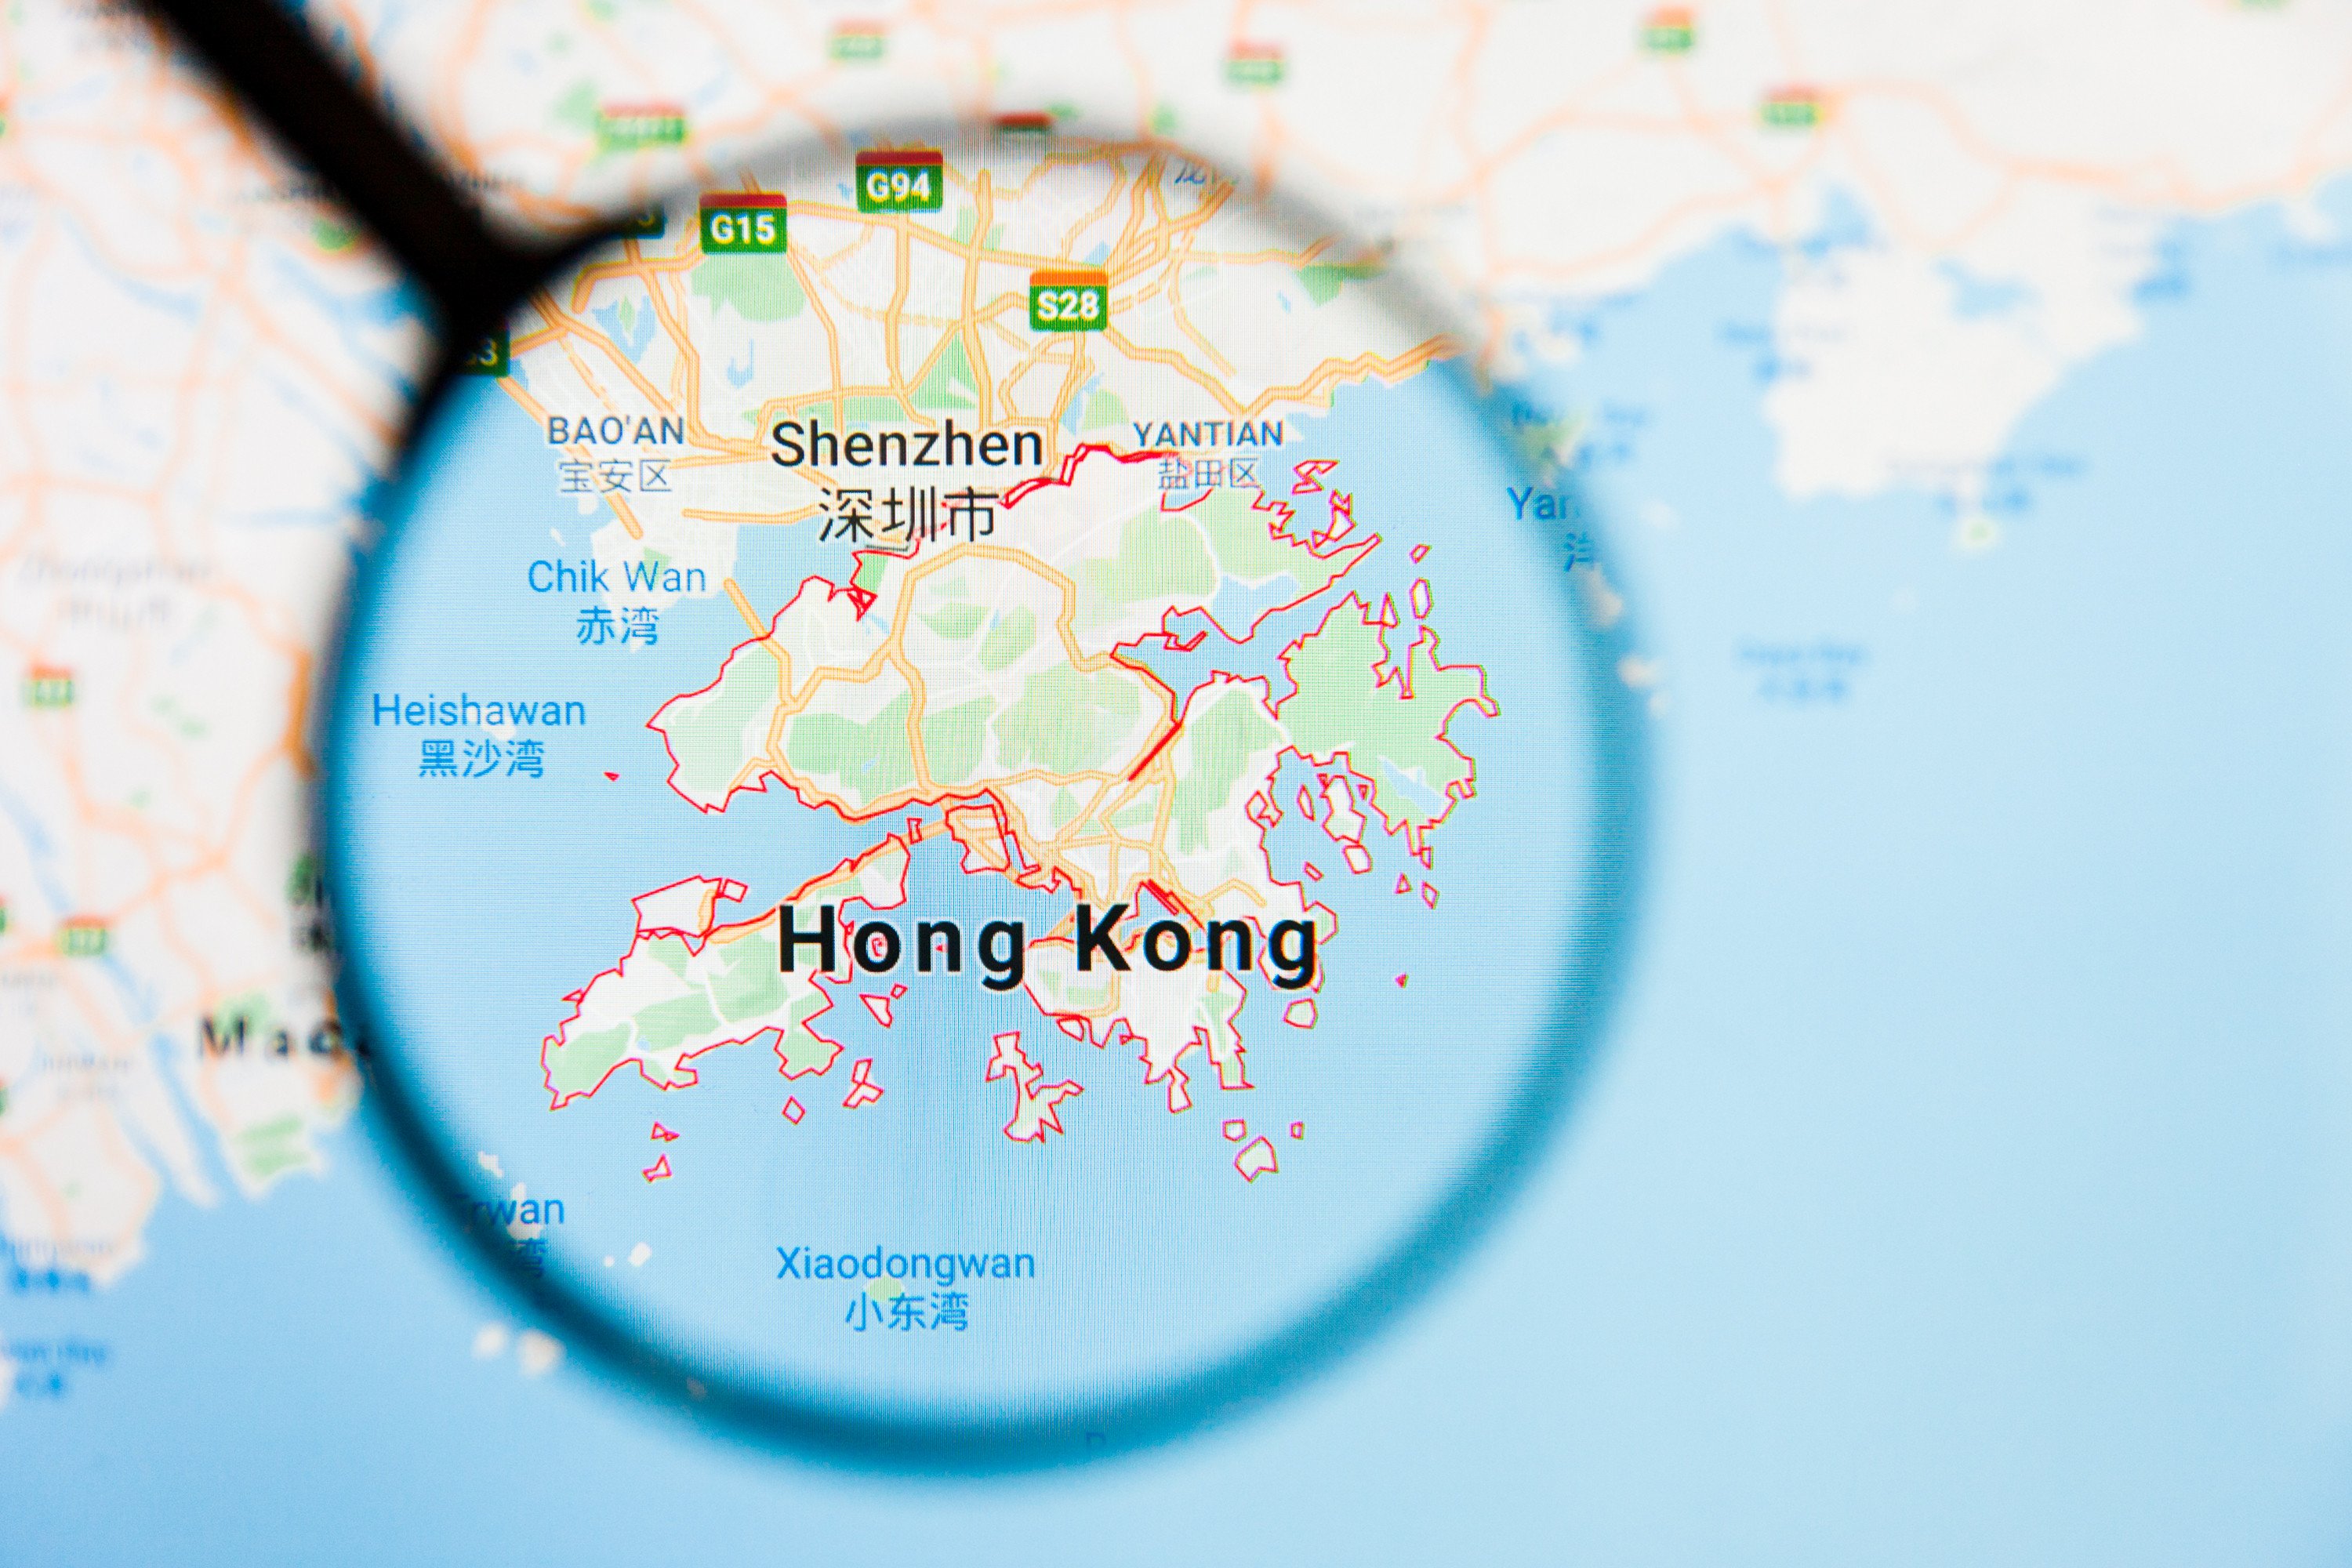 Hong Kong’s overall contribution to the Greater Bay Area’s research output has been the strongest in the areas of computer science and engineering. Photo: Shutterstock